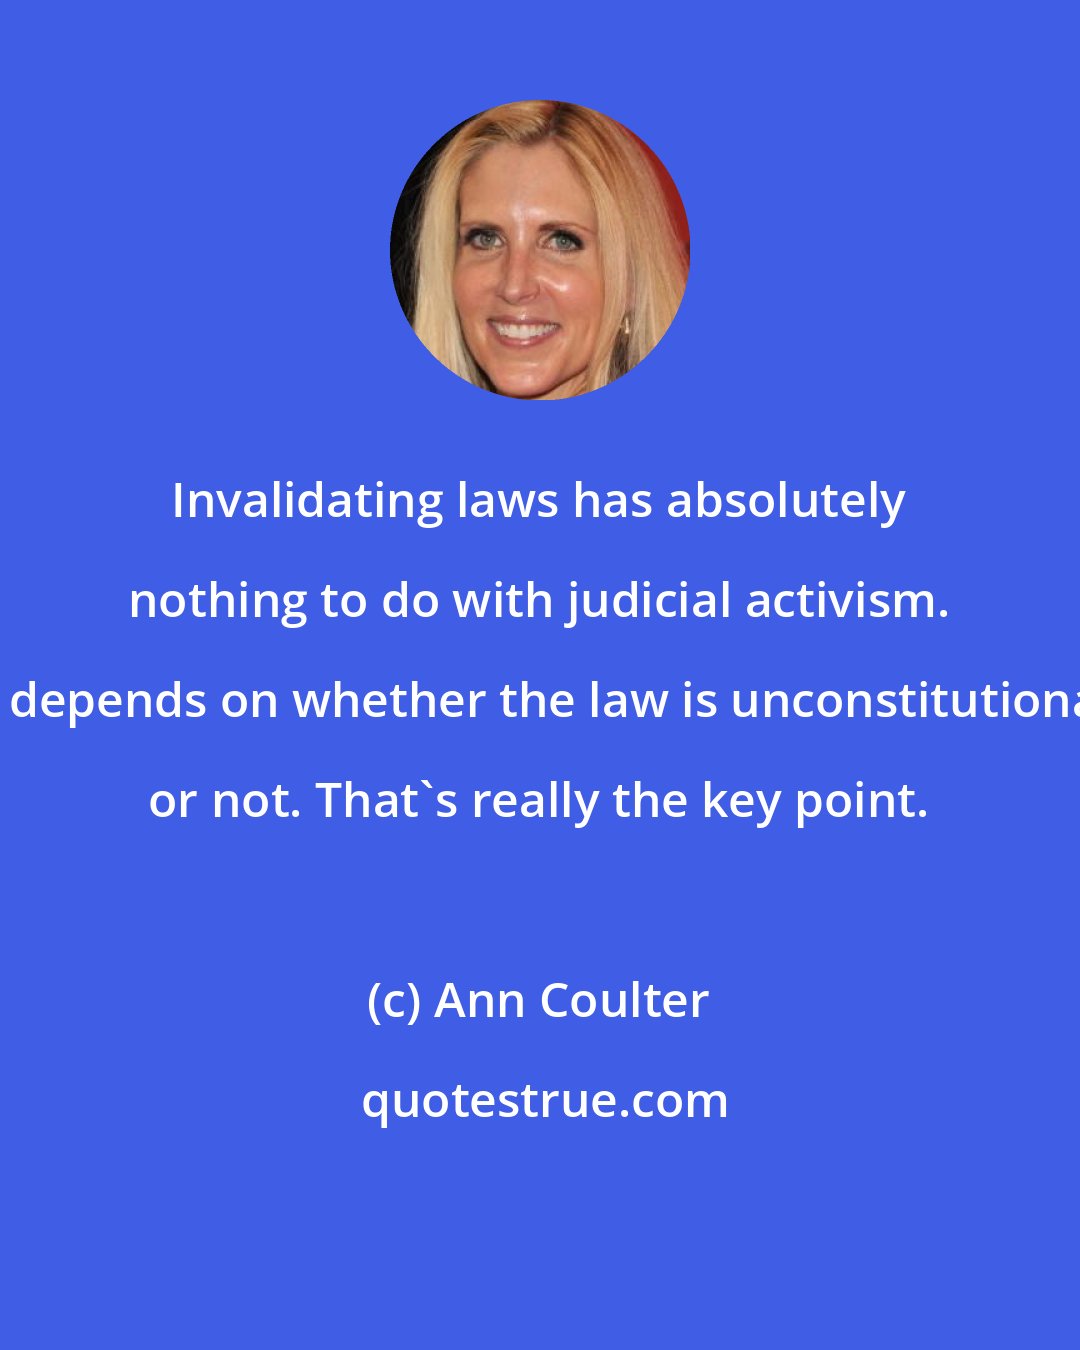 Ann Coulter: Invalidating laws has absolutely nothing to do with judicial activism. It depends on whether the law is unconstitutional or not. That's really the key point.